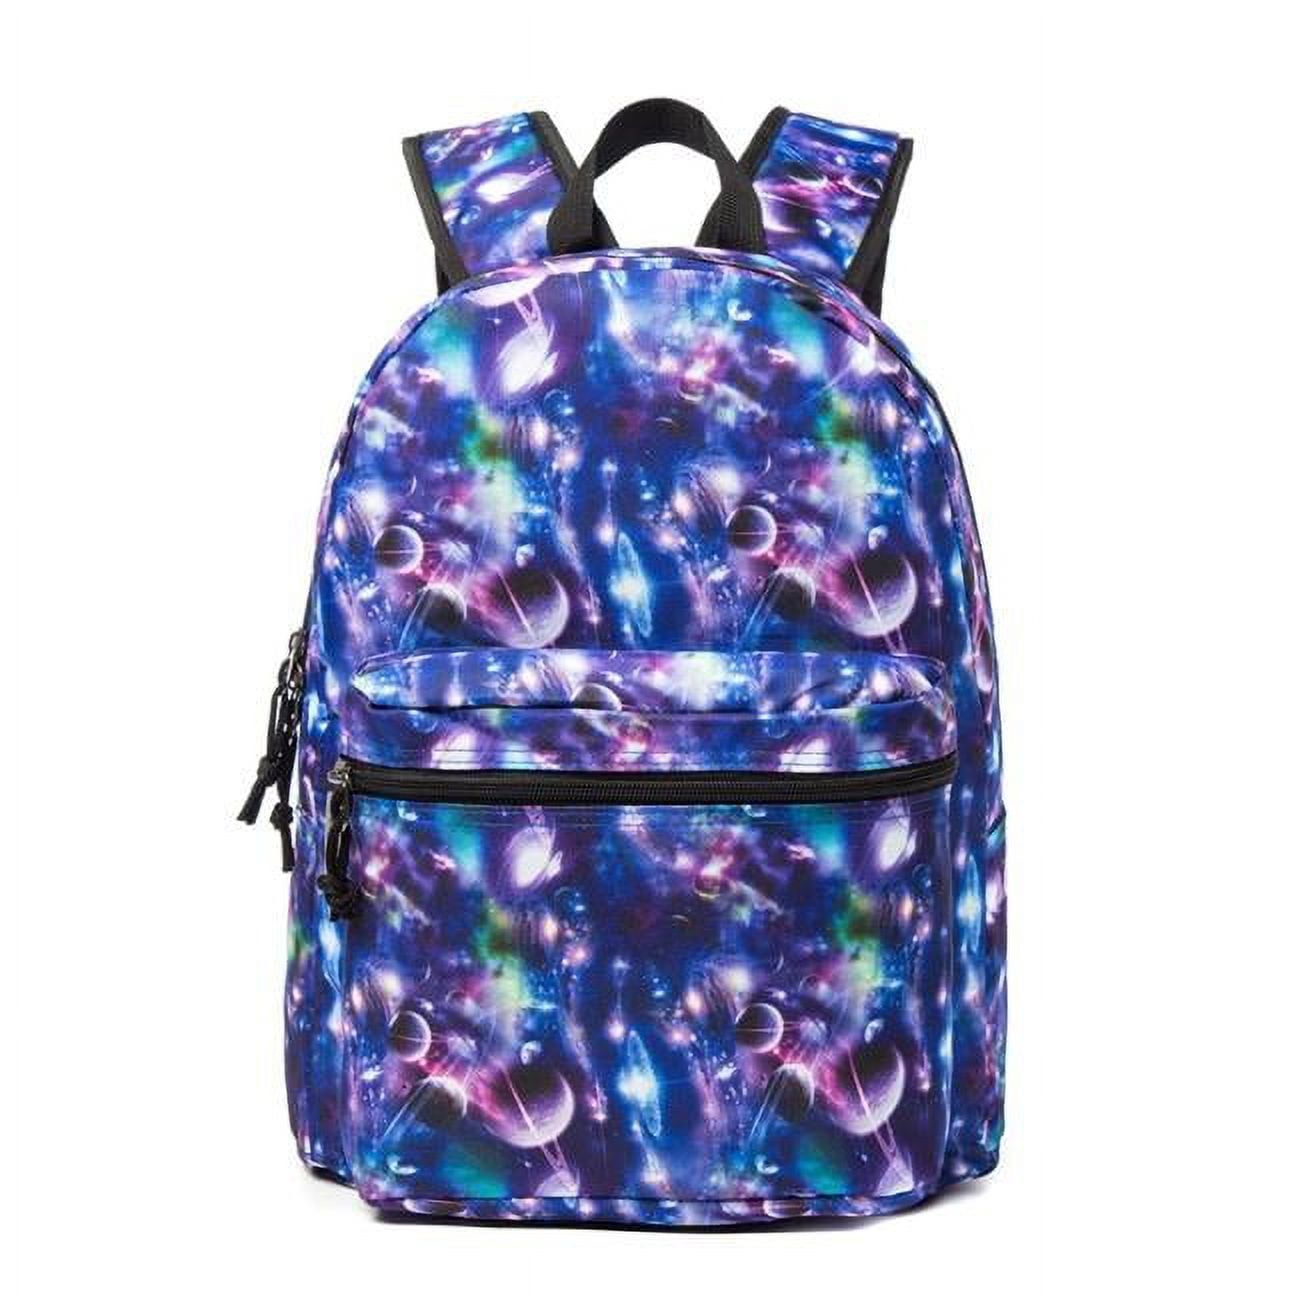 Picture of DDI 2352996 Planet Backpack Laptop Bookbag Case of 25